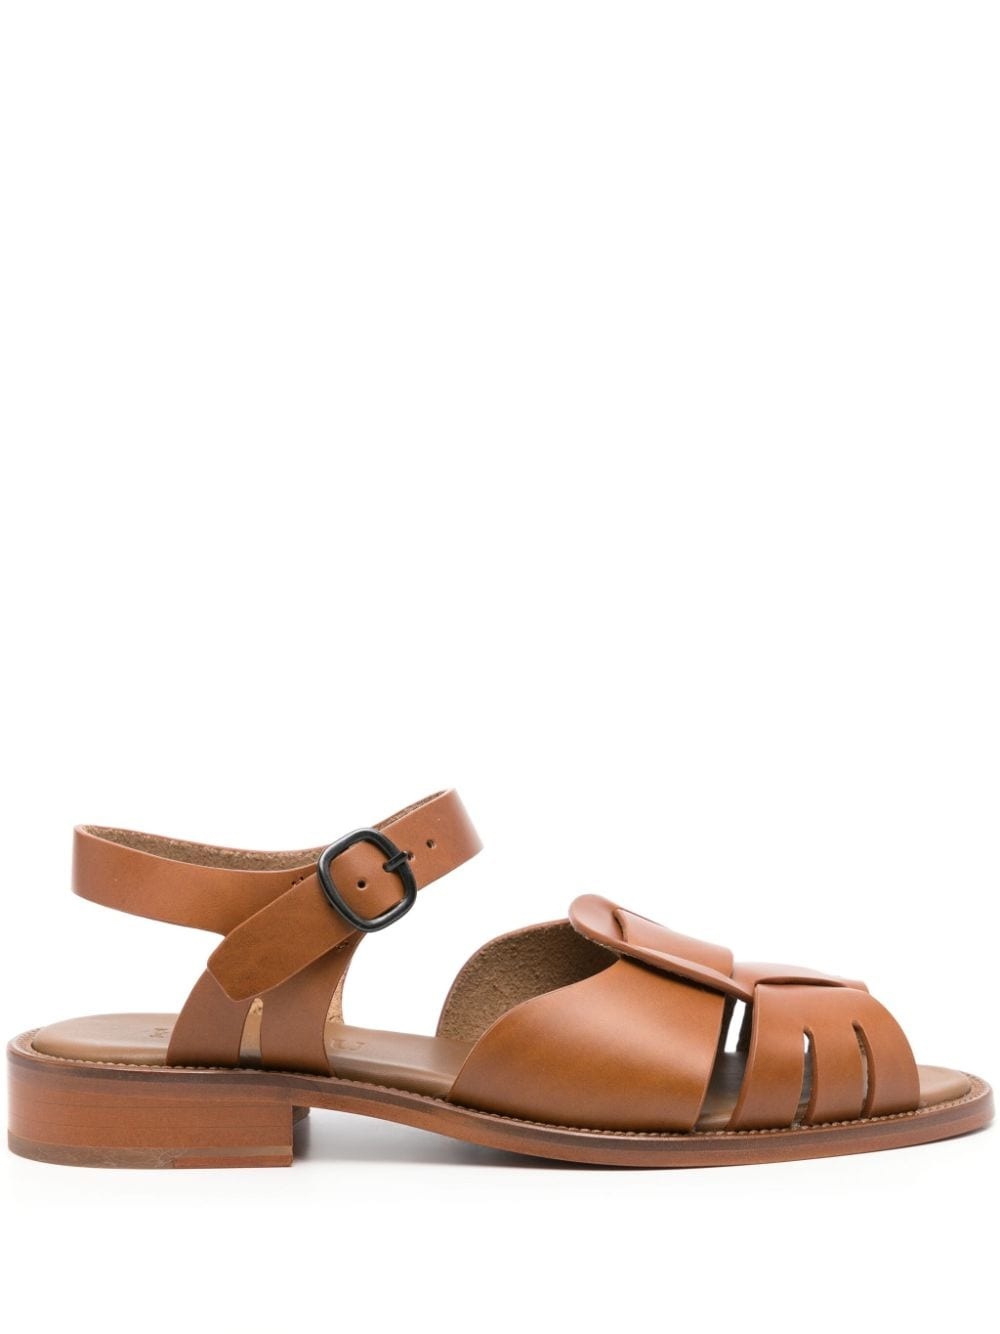 Ancora leather sandals - 1